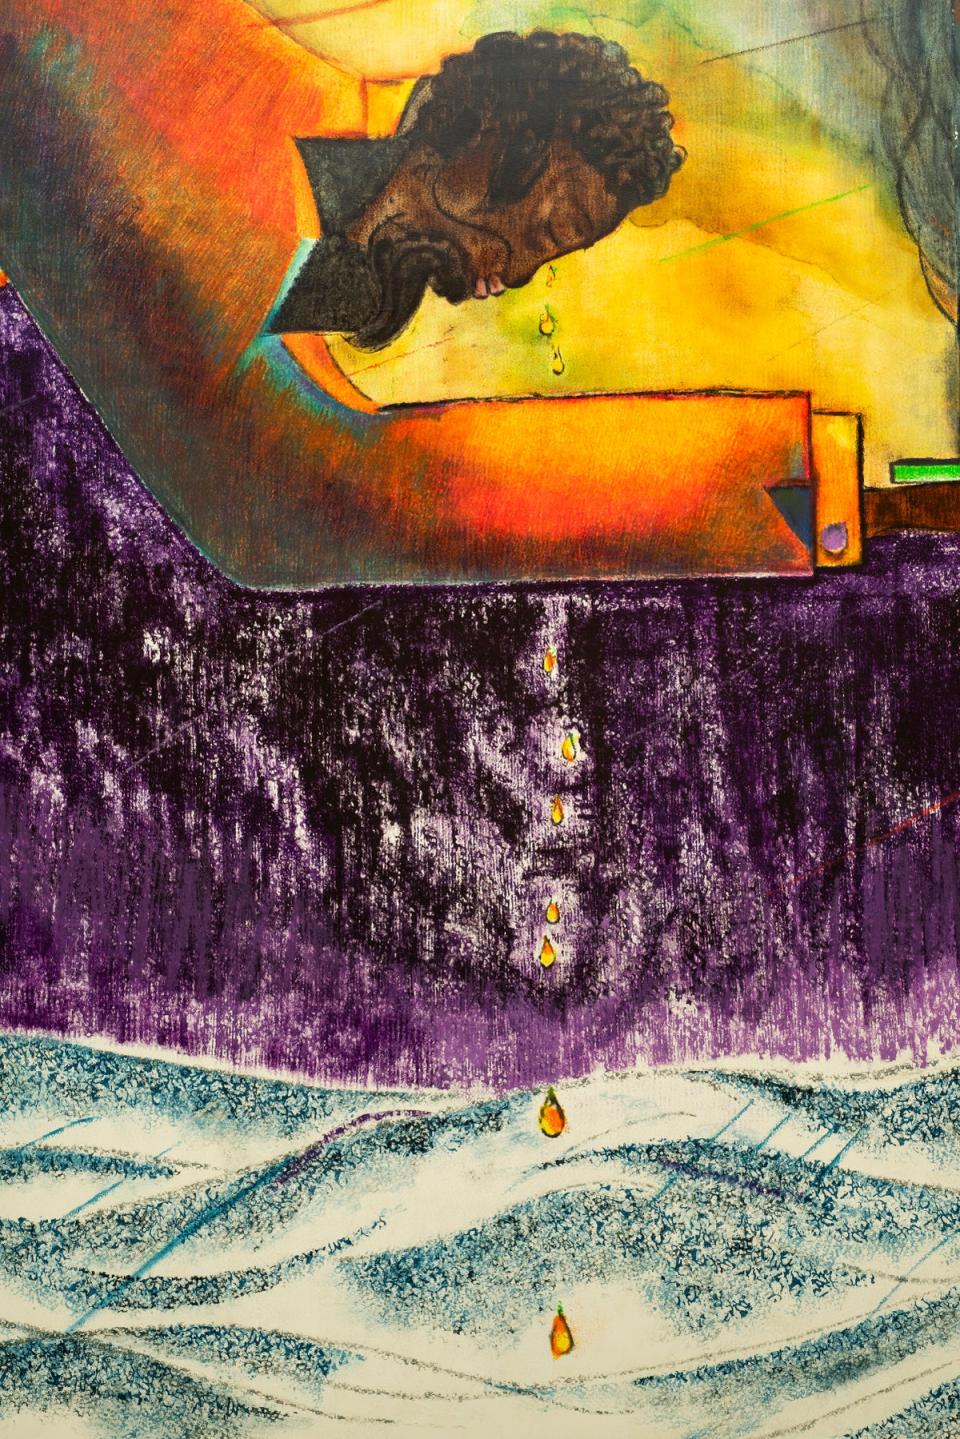 A detail of Chris Ofili’s Requiem at Tate Britain (© Chris Ofili. Courtesy the artist. Photograph: Thierry Bal)